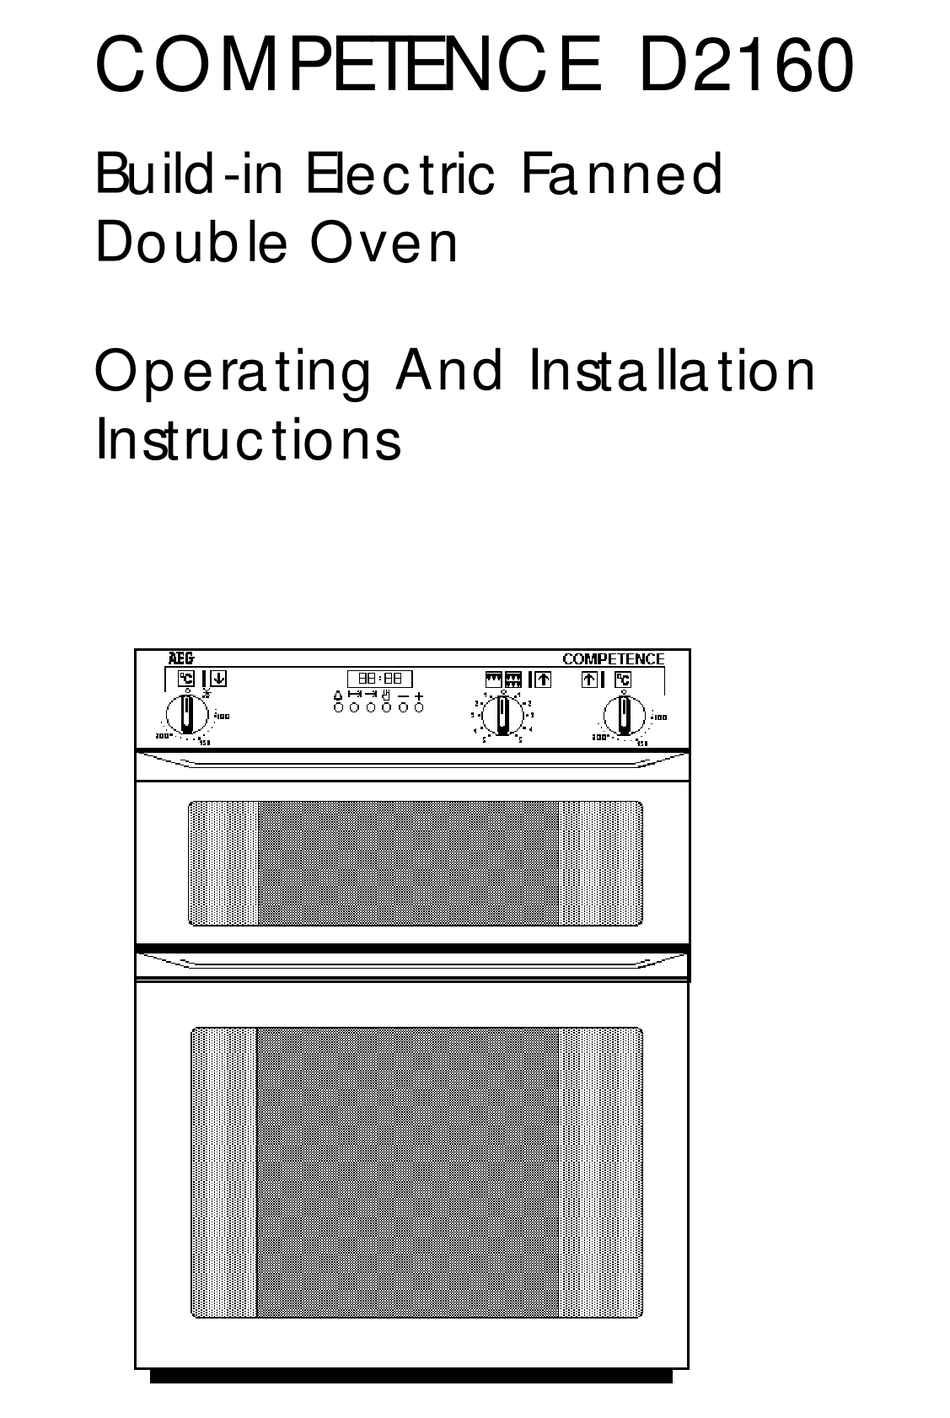 Setting Oven Timer - AEG COMPETENCE D2160 Operating Installation Instructions [Page 9] | ManualsLib